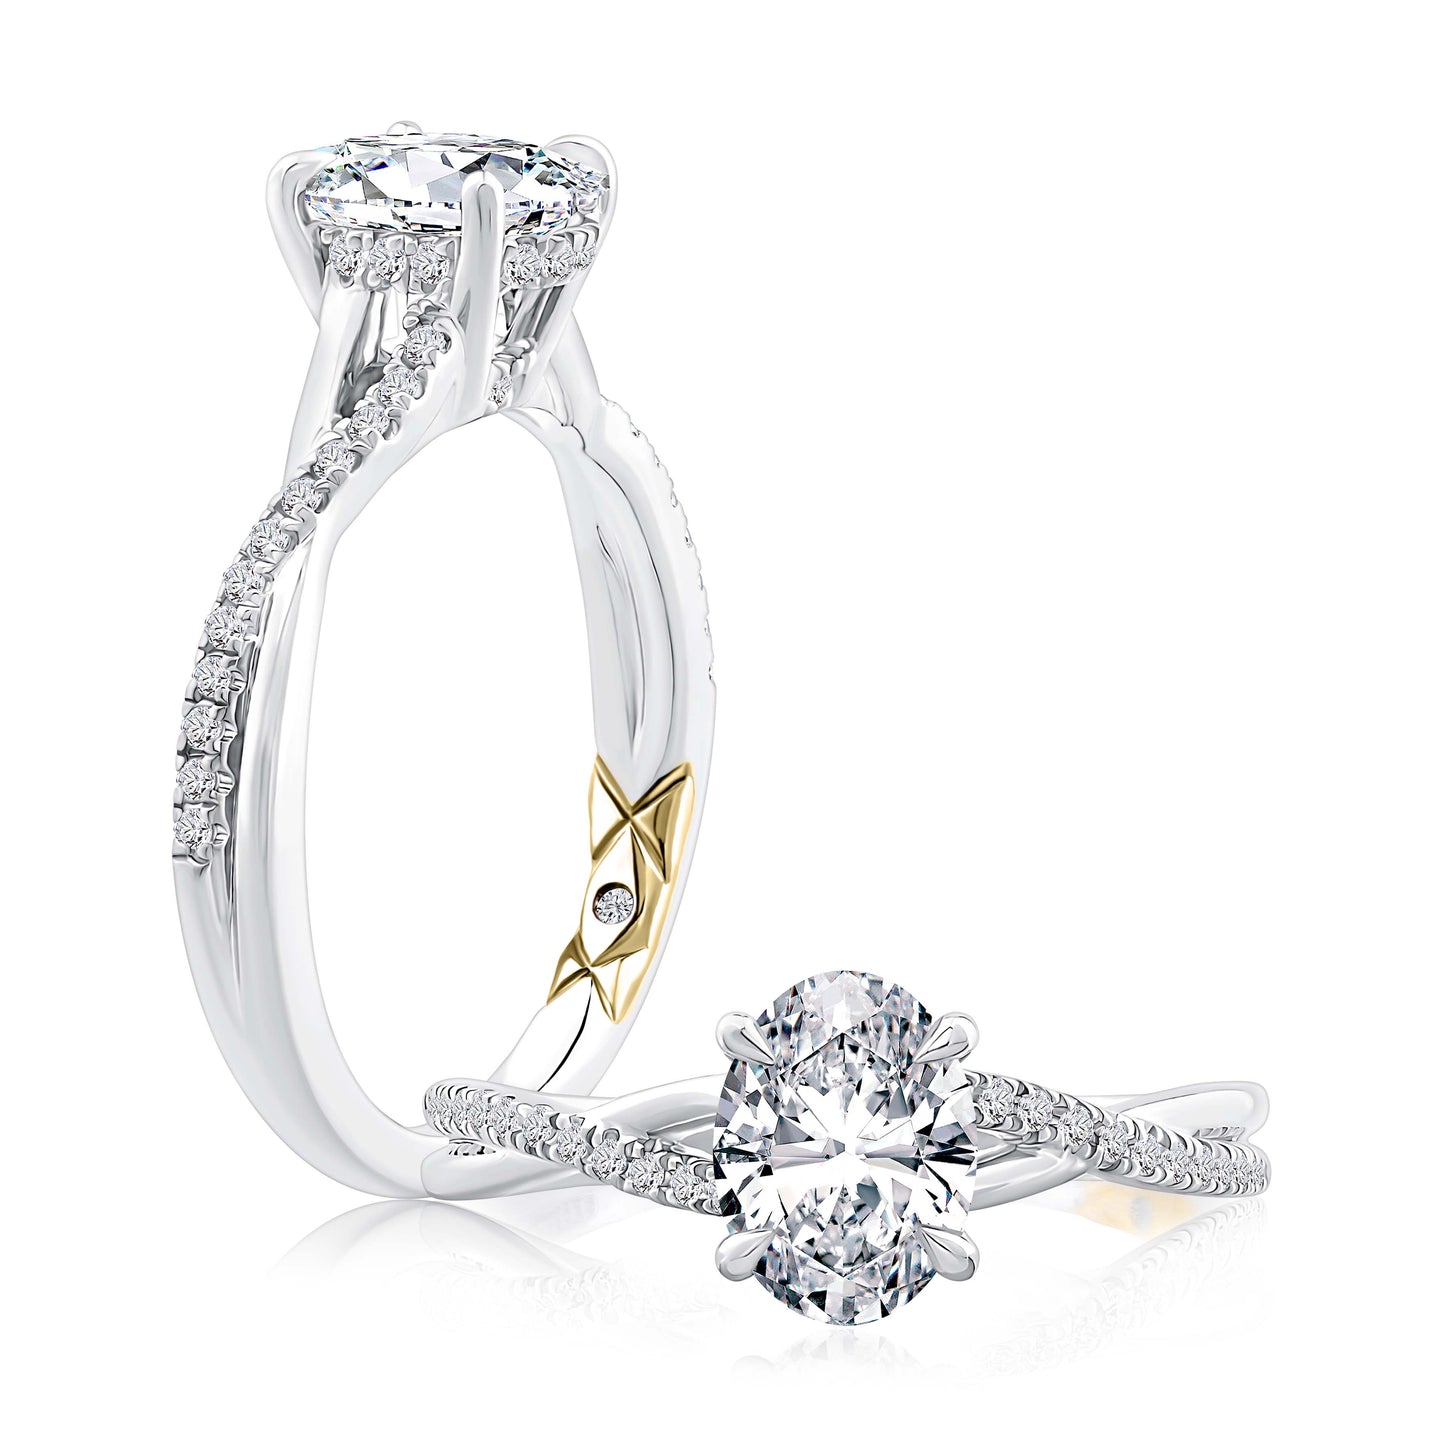 A. Jaffe Intertwined Oval Diamond Engagement Ring Semi-Mounting in 14K White and Yellow Gold